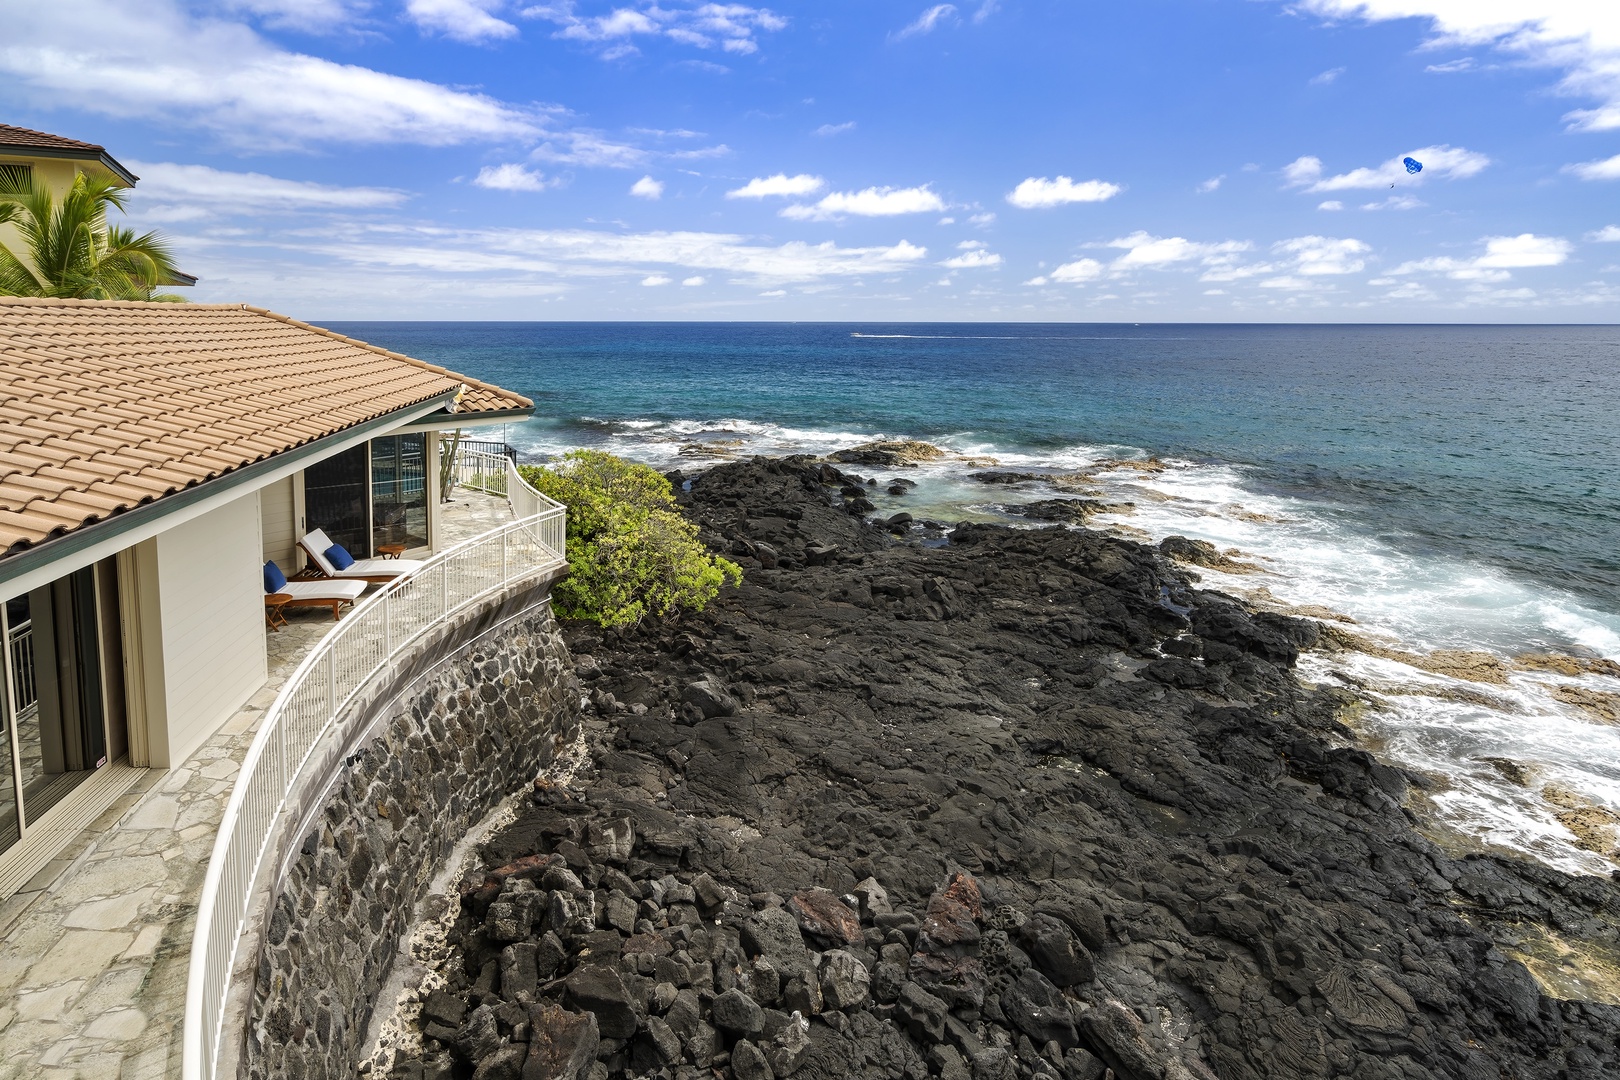 Kailua Kona Vacation Rentals, Ali'i Point #12 - Can't get much closer than this!